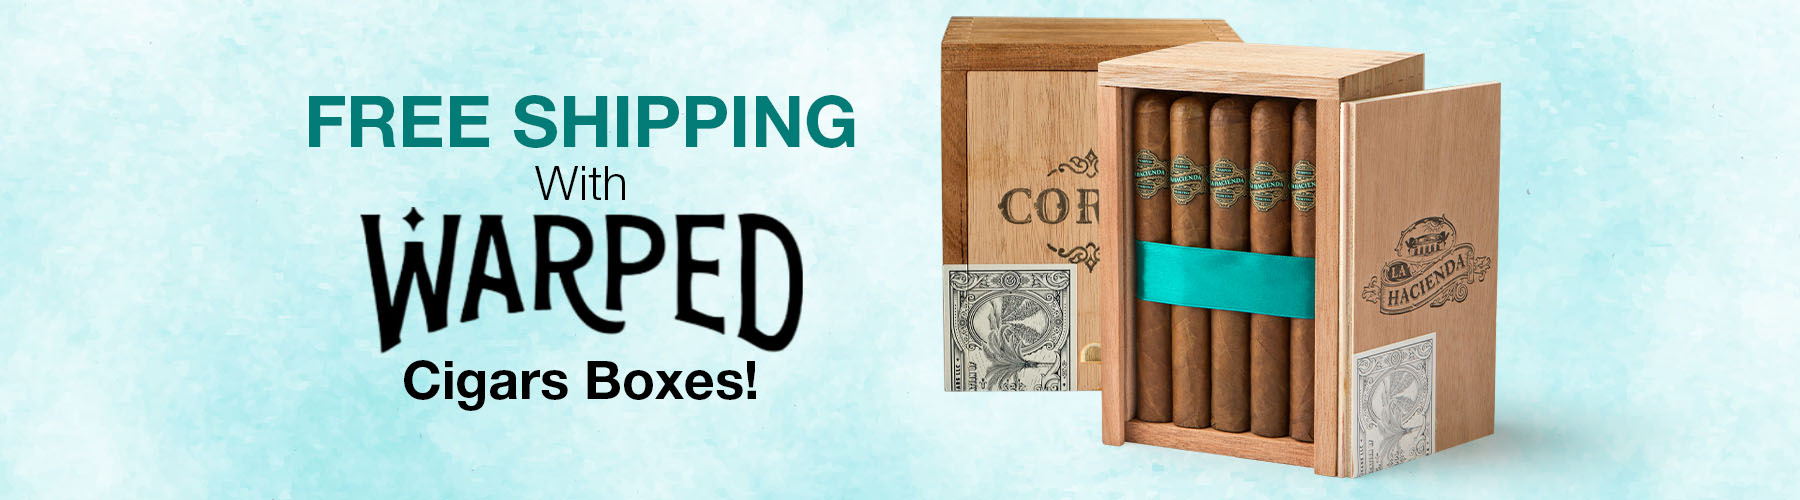 Free Shipping with Warped Cigars boxes!